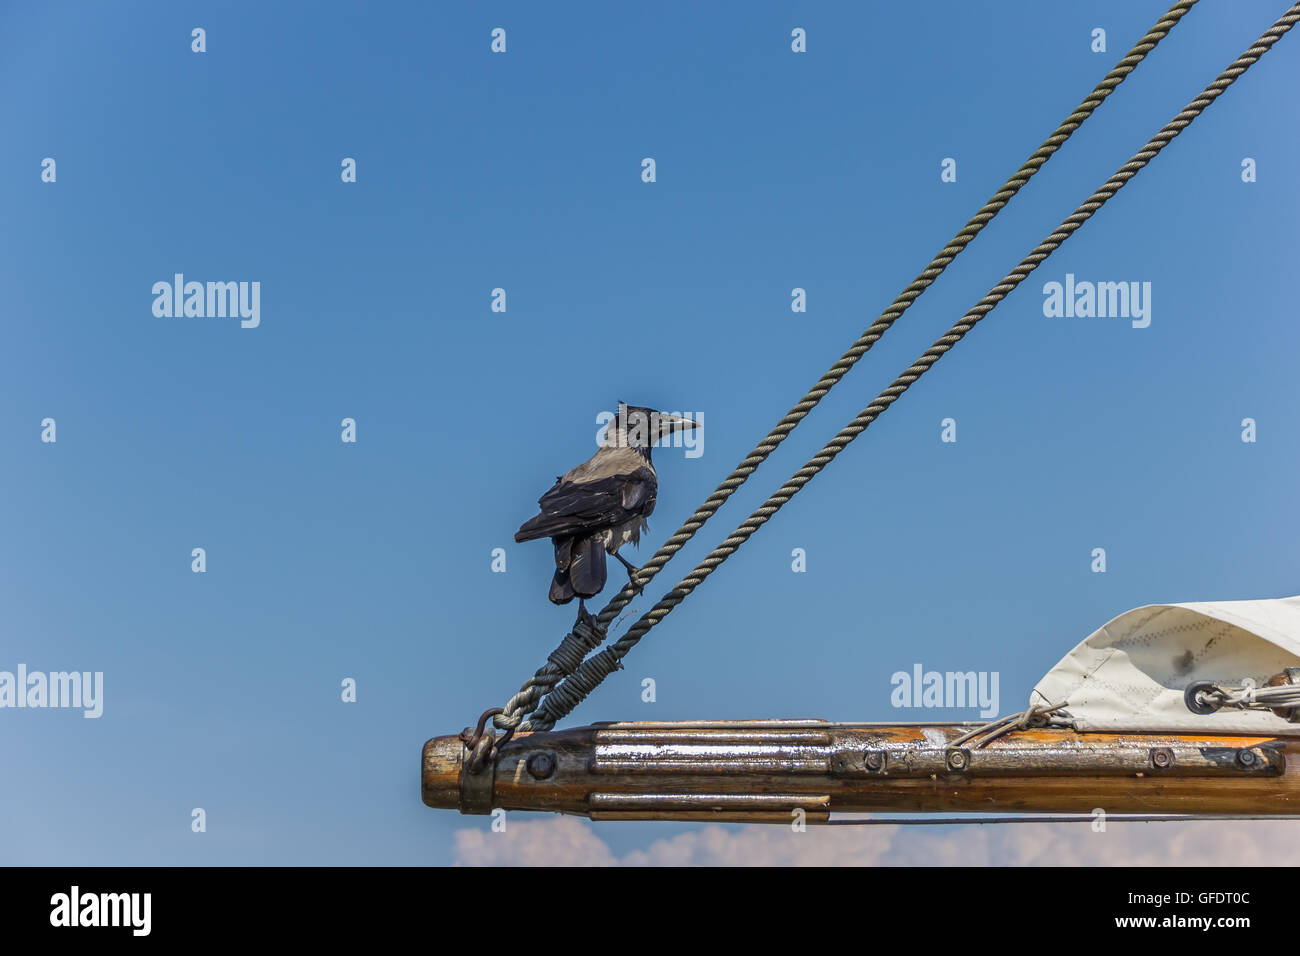 Black crow sitting on the boom of an old sailboat Stock Photo